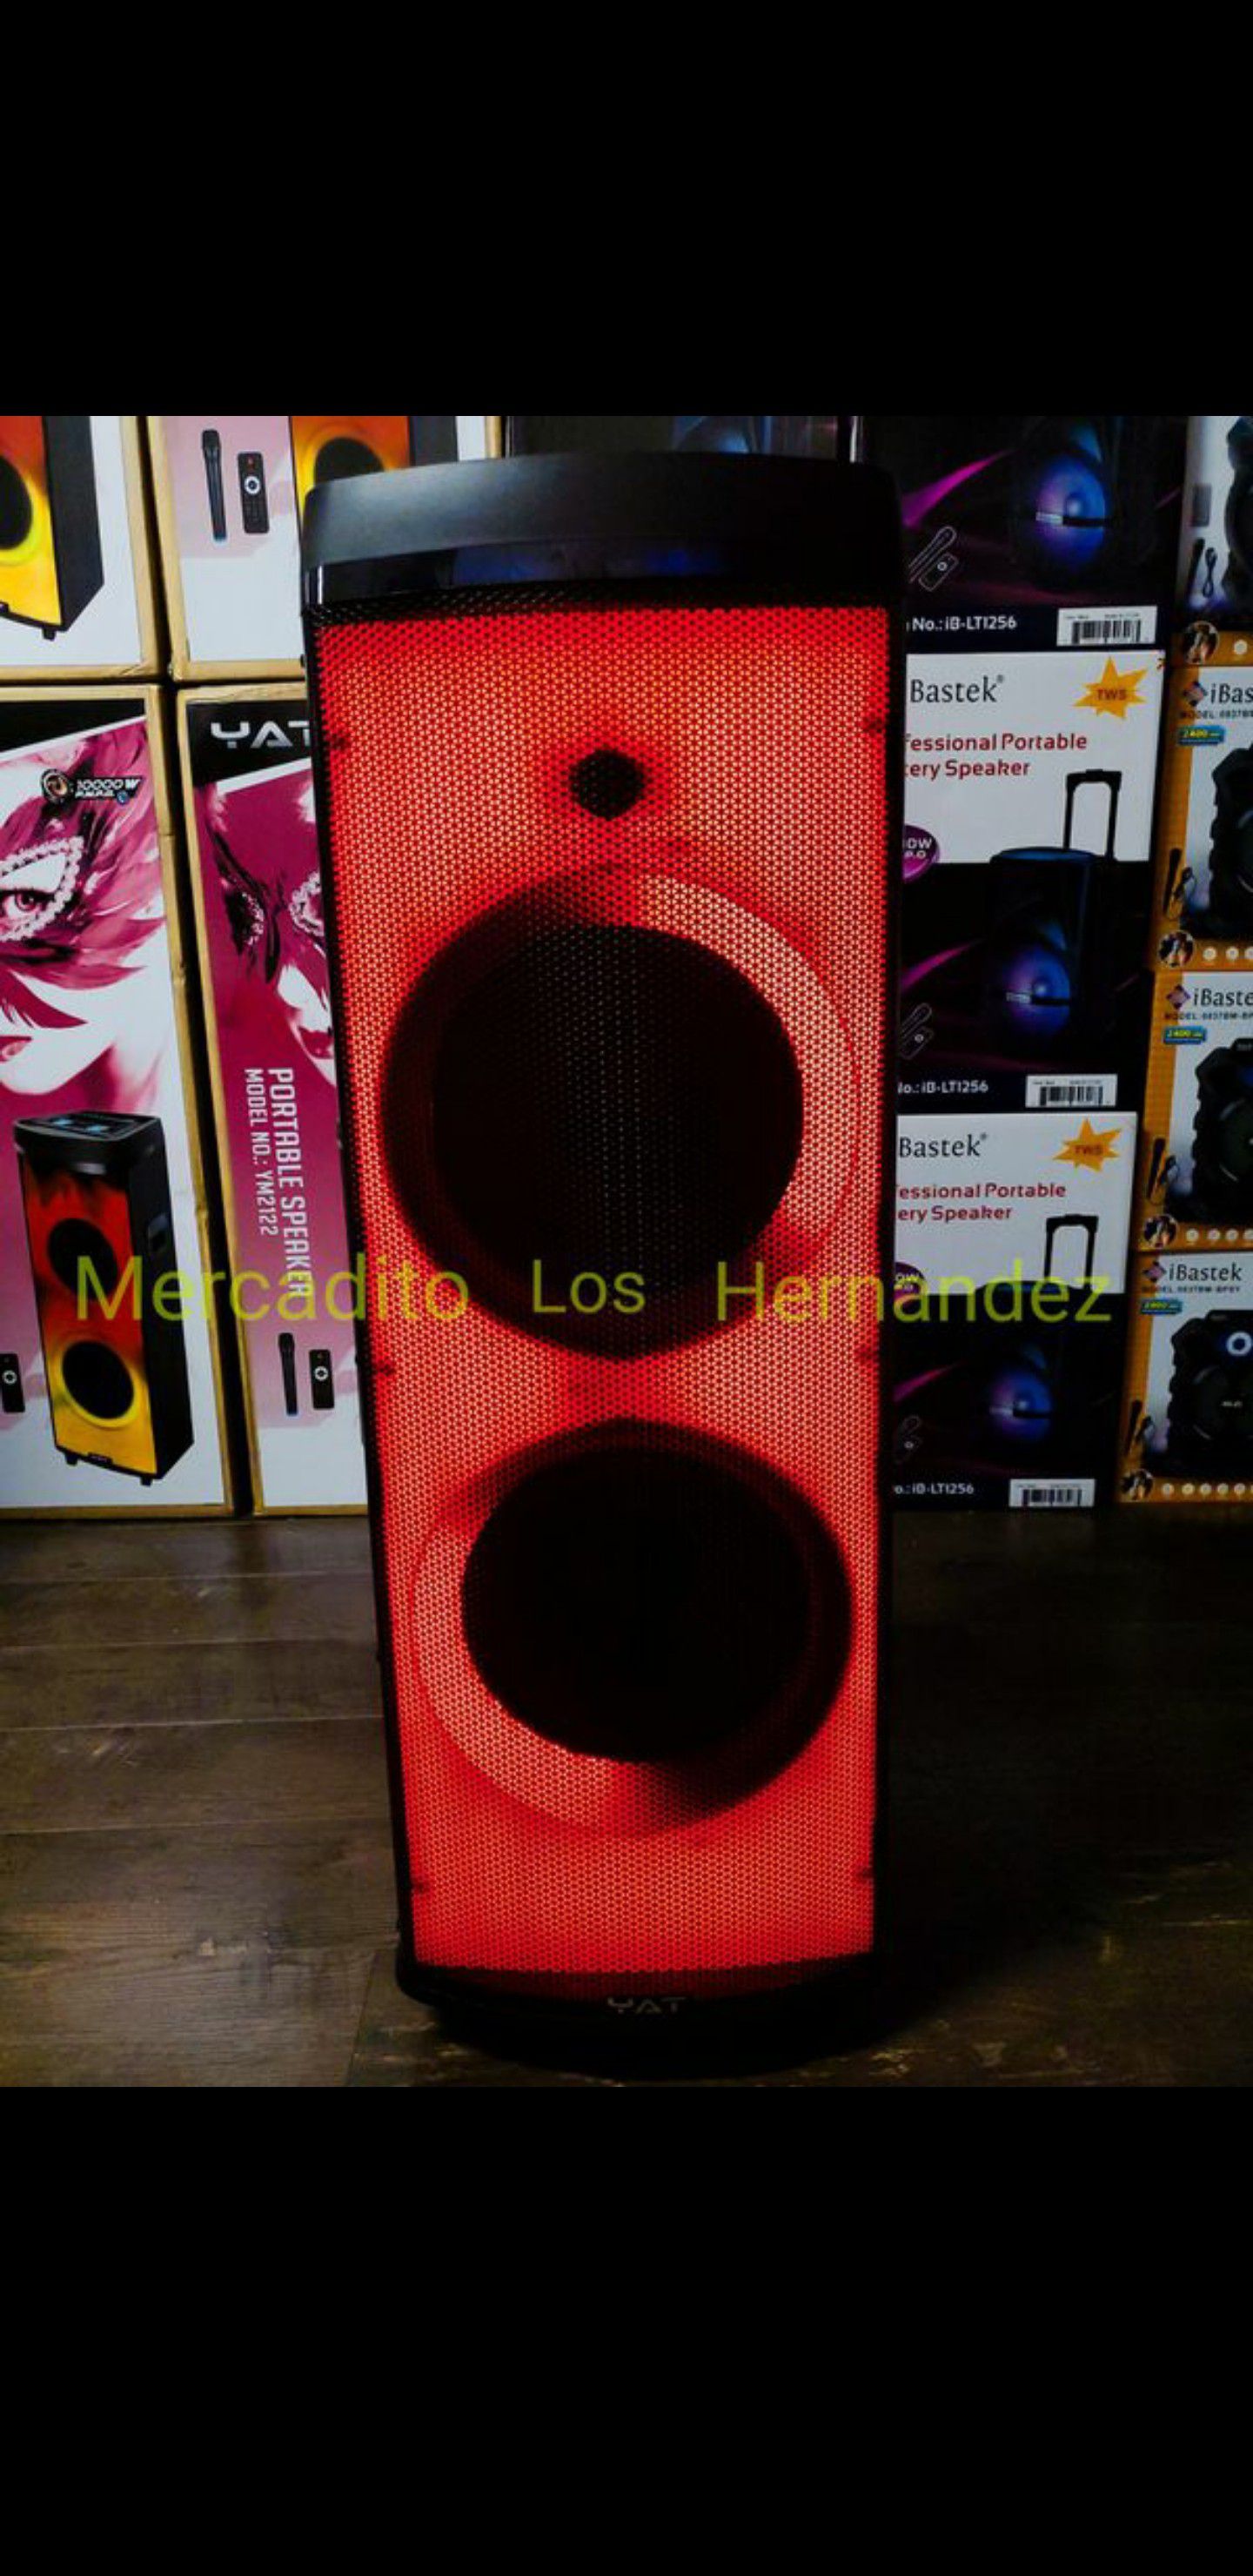 Bocina Bluetooth Speaker Wireless 🎤 💥 SPECIAL PRICE LATEST MODEL💥 Nueva 2 x 12" WOOFERS SUPER BASS🔊 Rechargeable 🔋+++